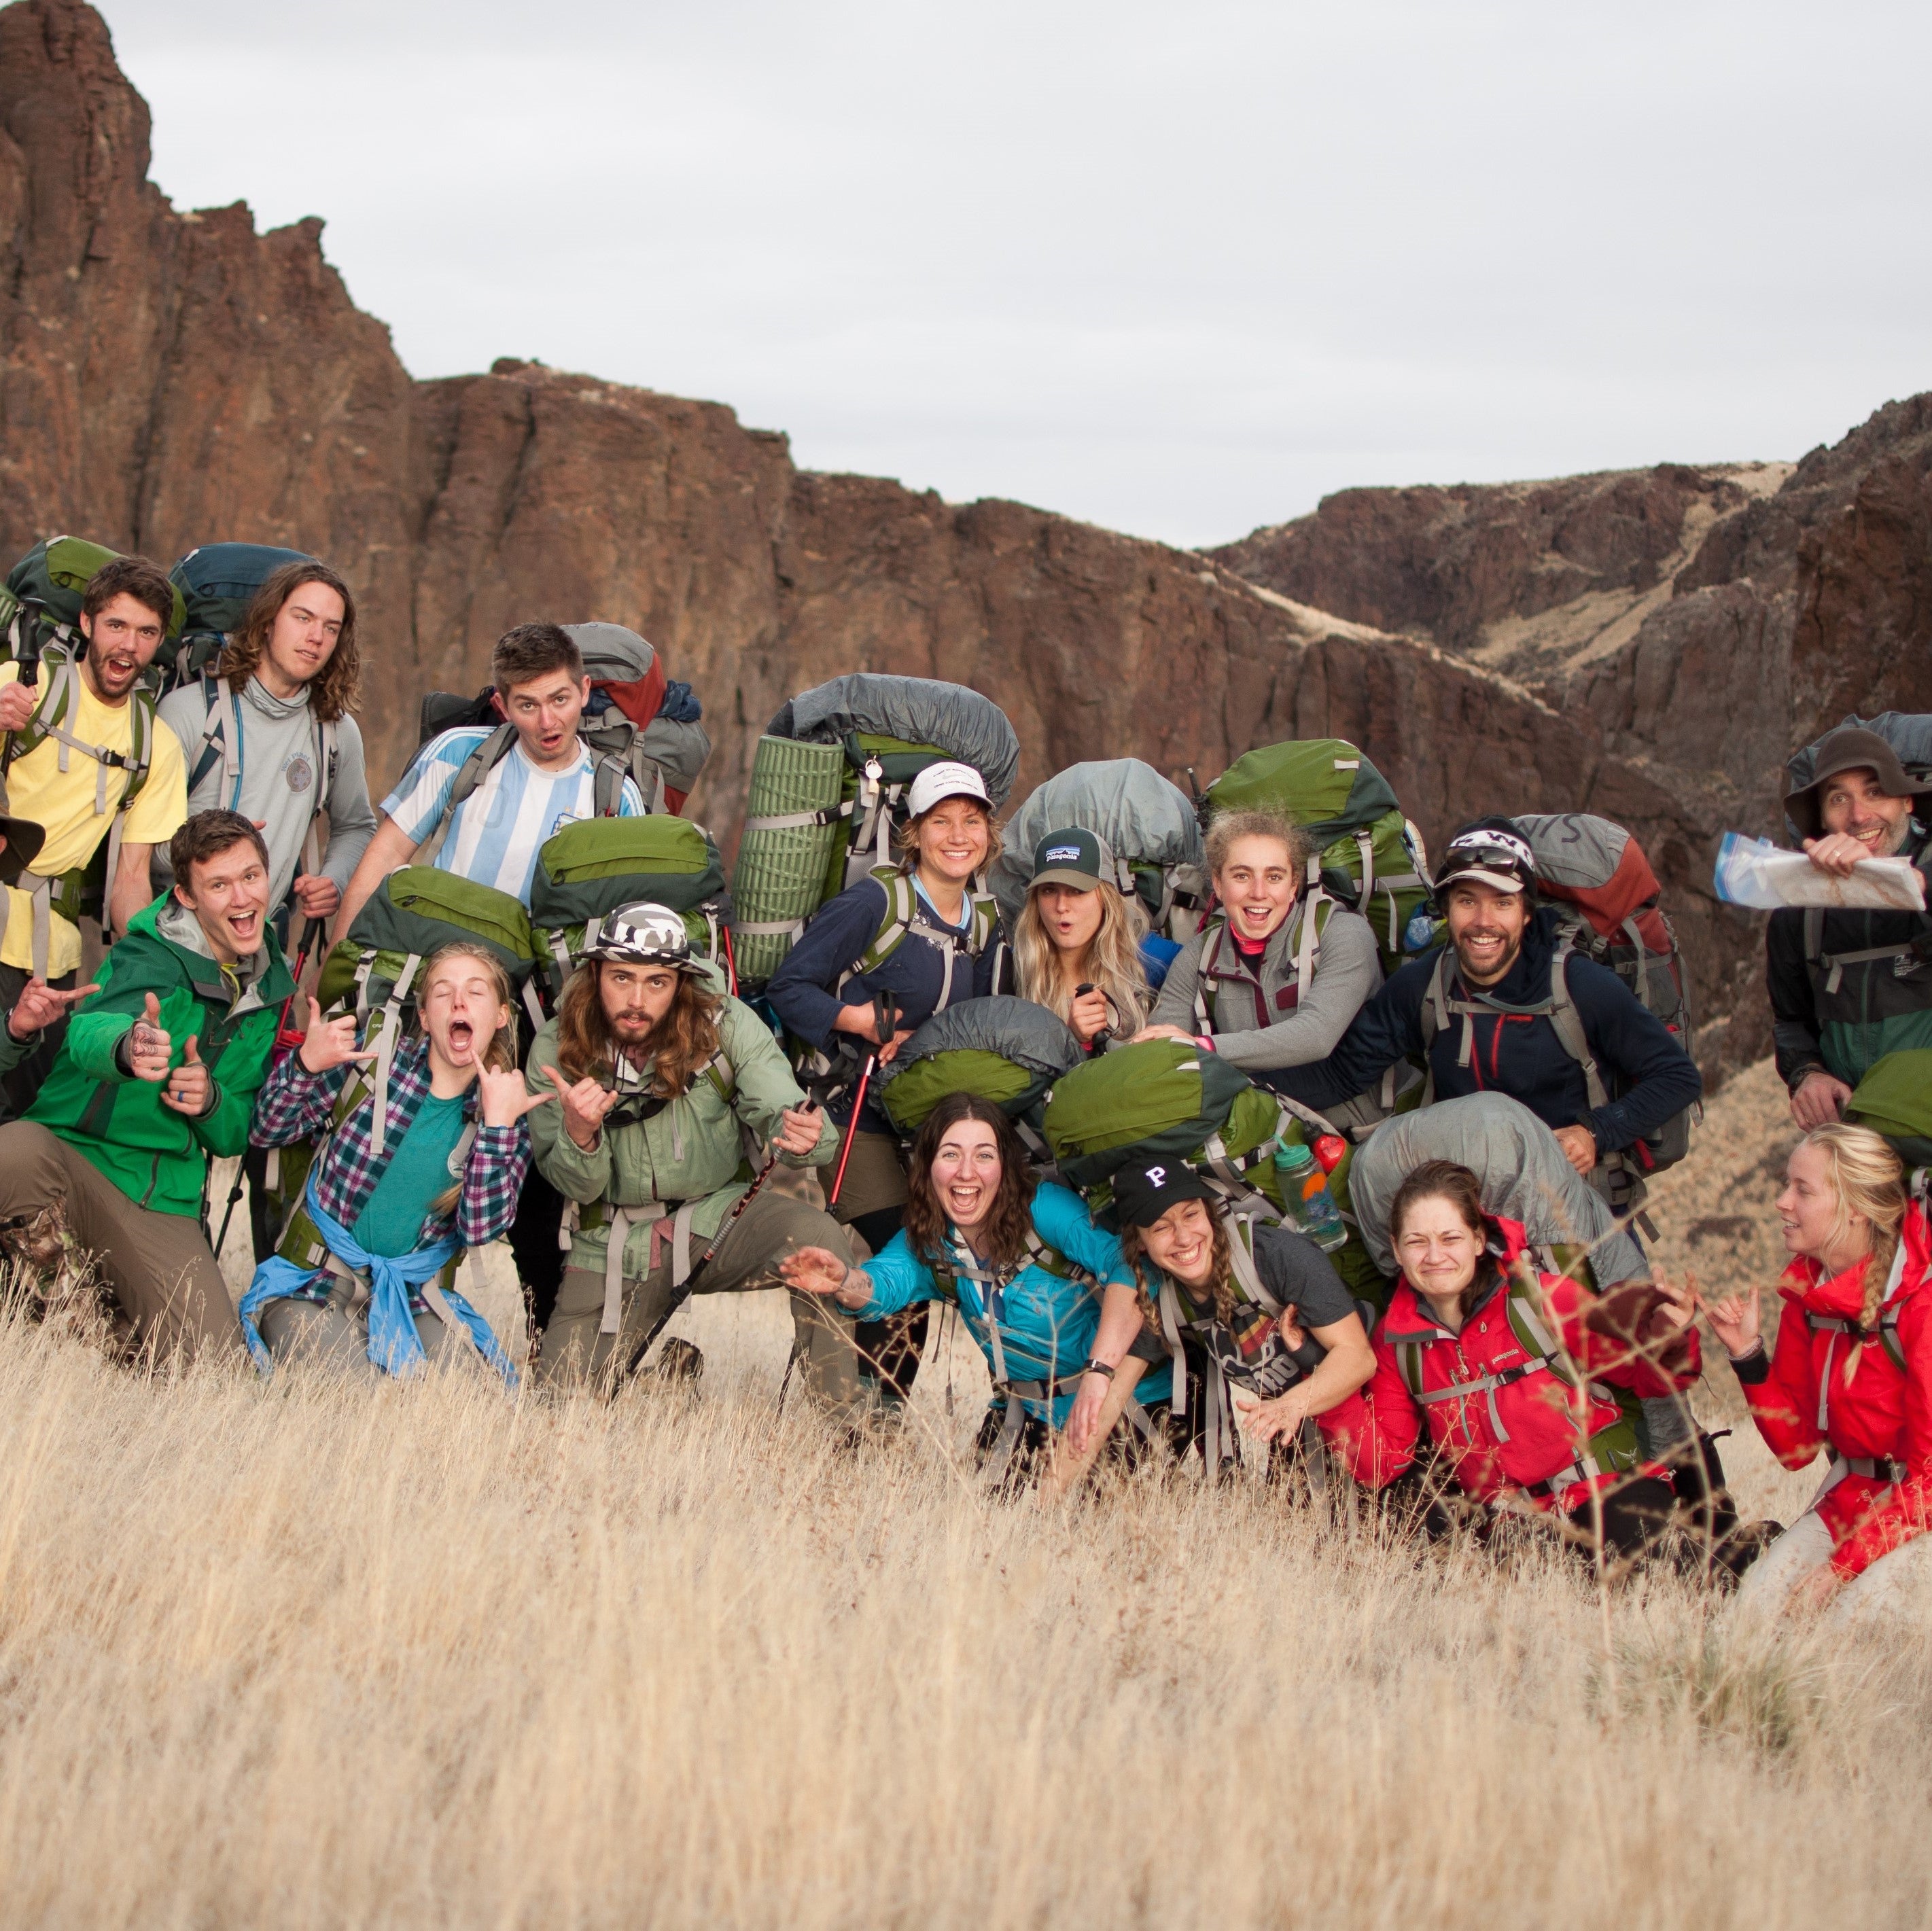 A group of people posing for a picture with hiking backpacks on